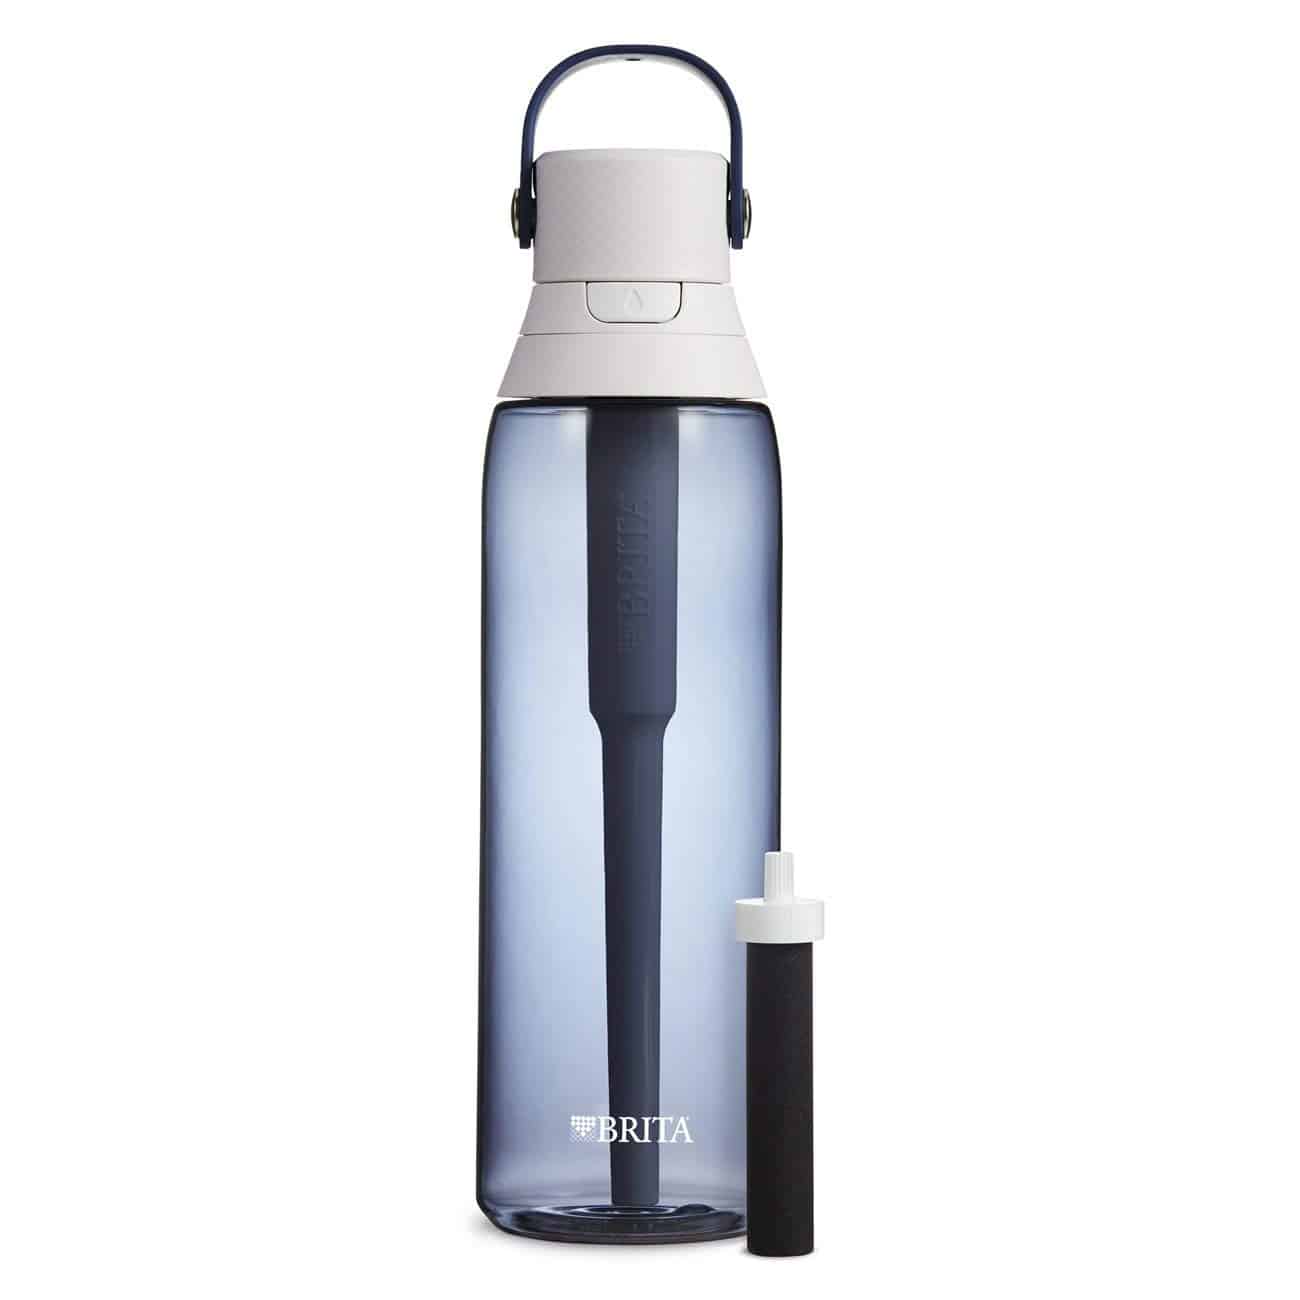 Brita Water Bottle: A Convenient and Reliable Hydration Solution